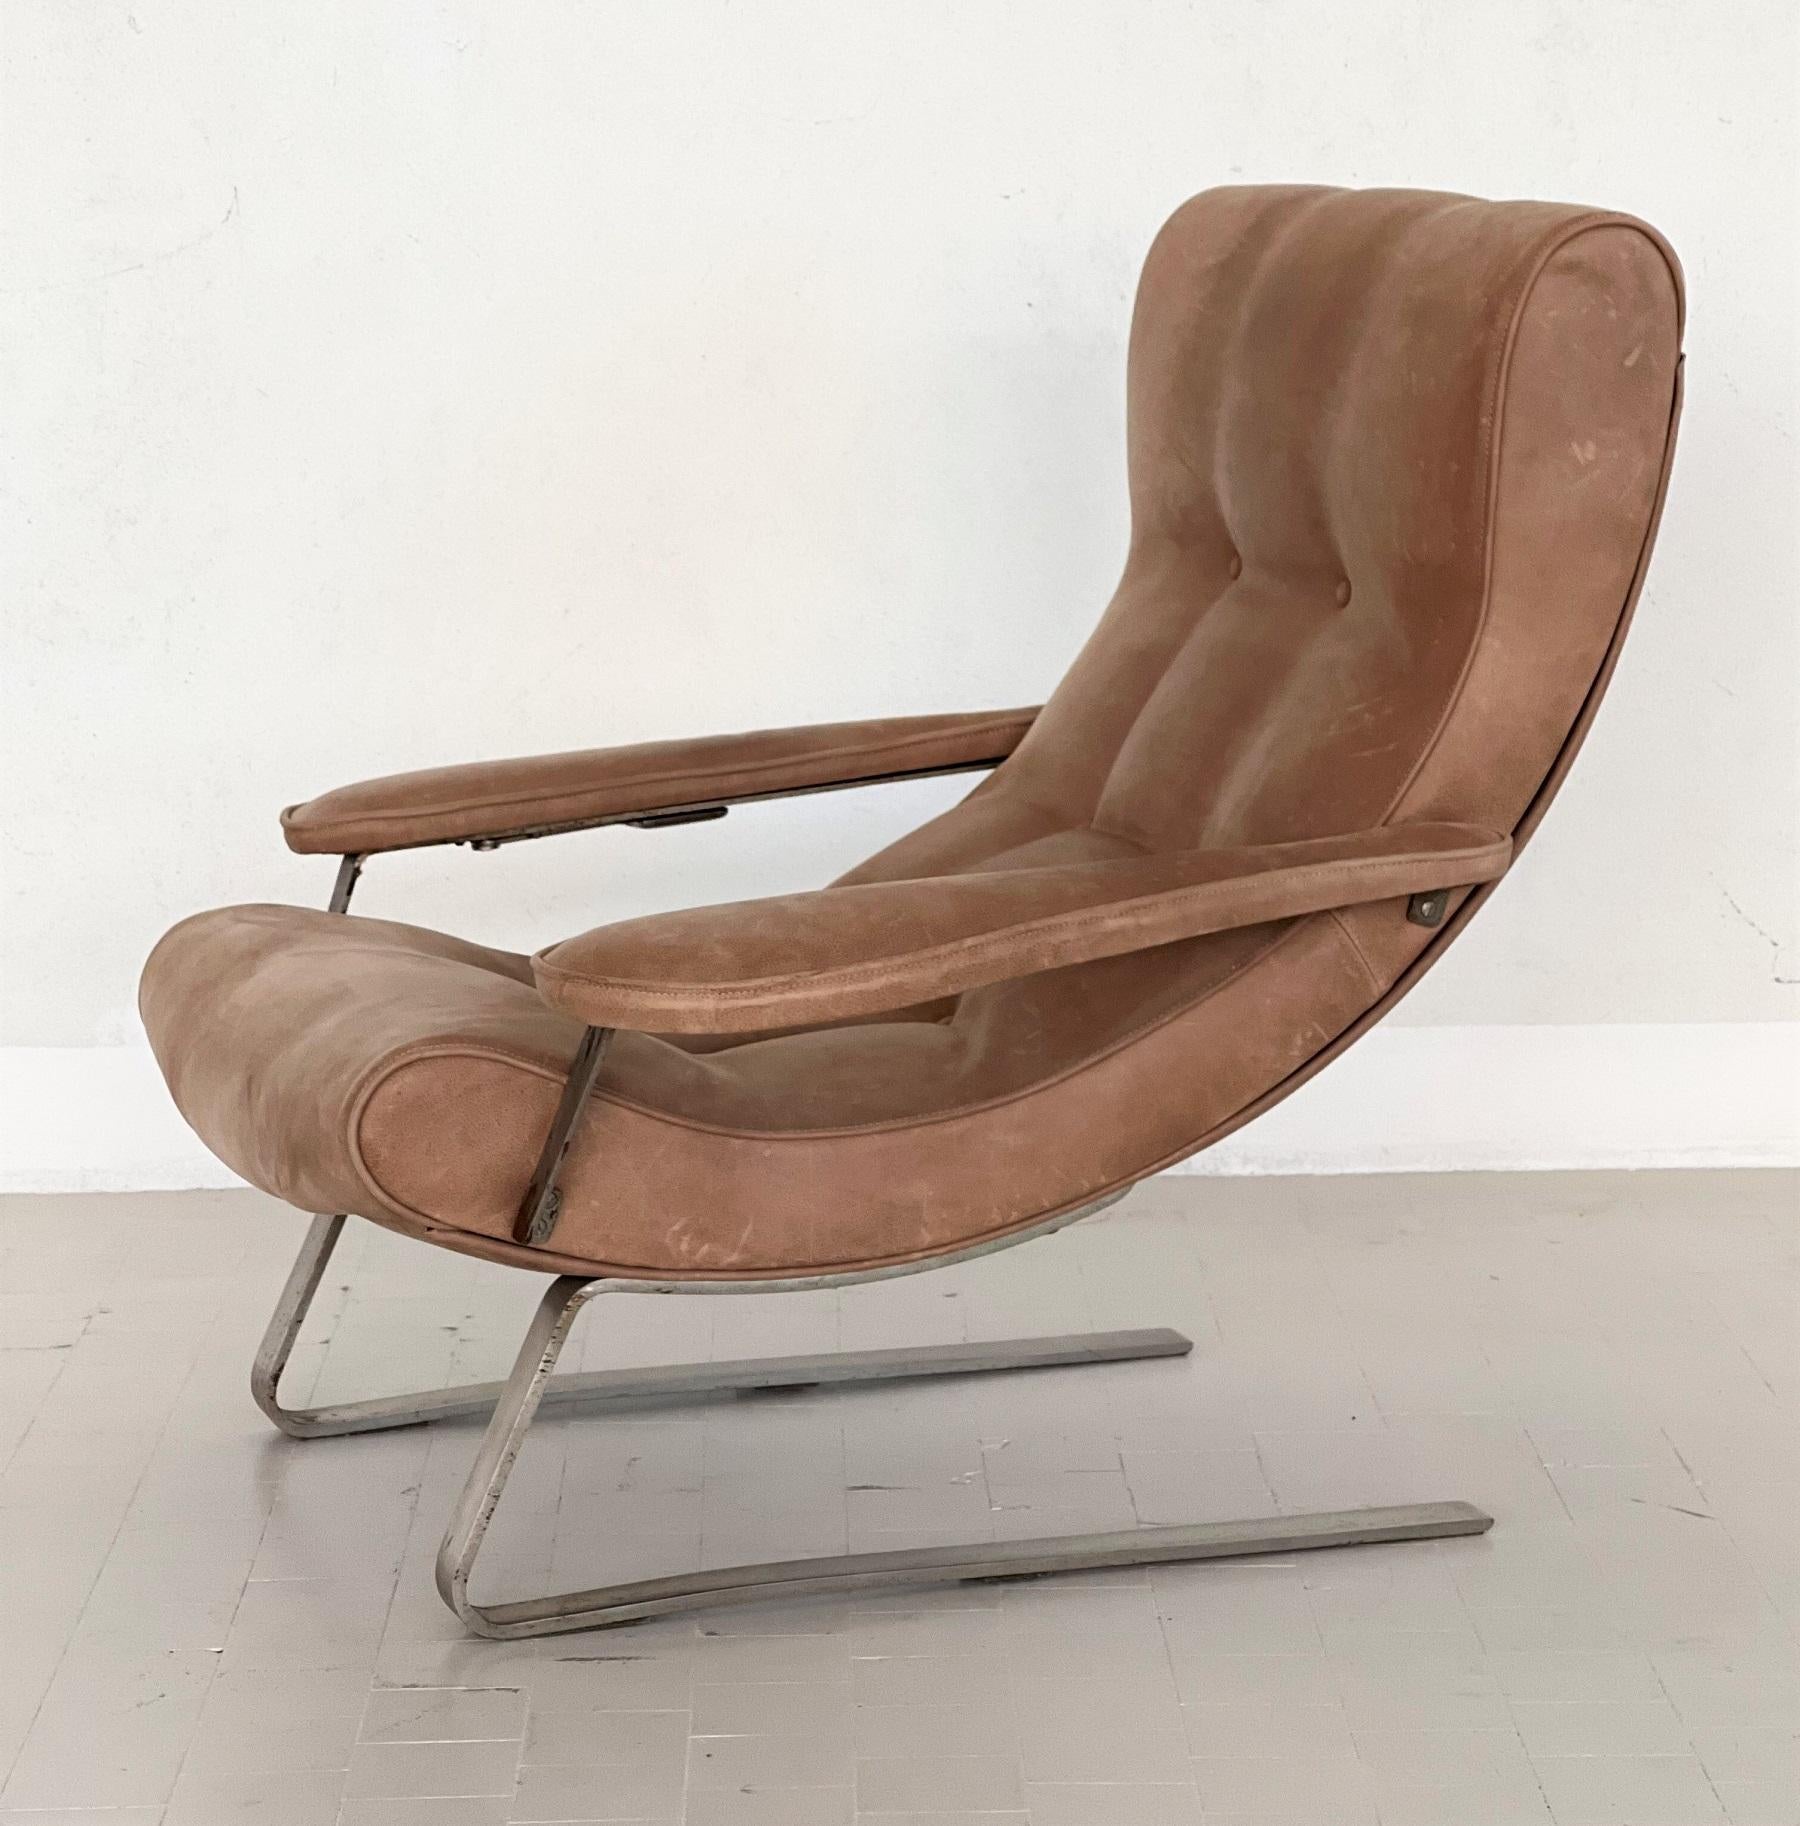 Midcentury Lounge Chair in Suede by Guido Bonzani for Tecnosalotto, 1970s For Sale 13